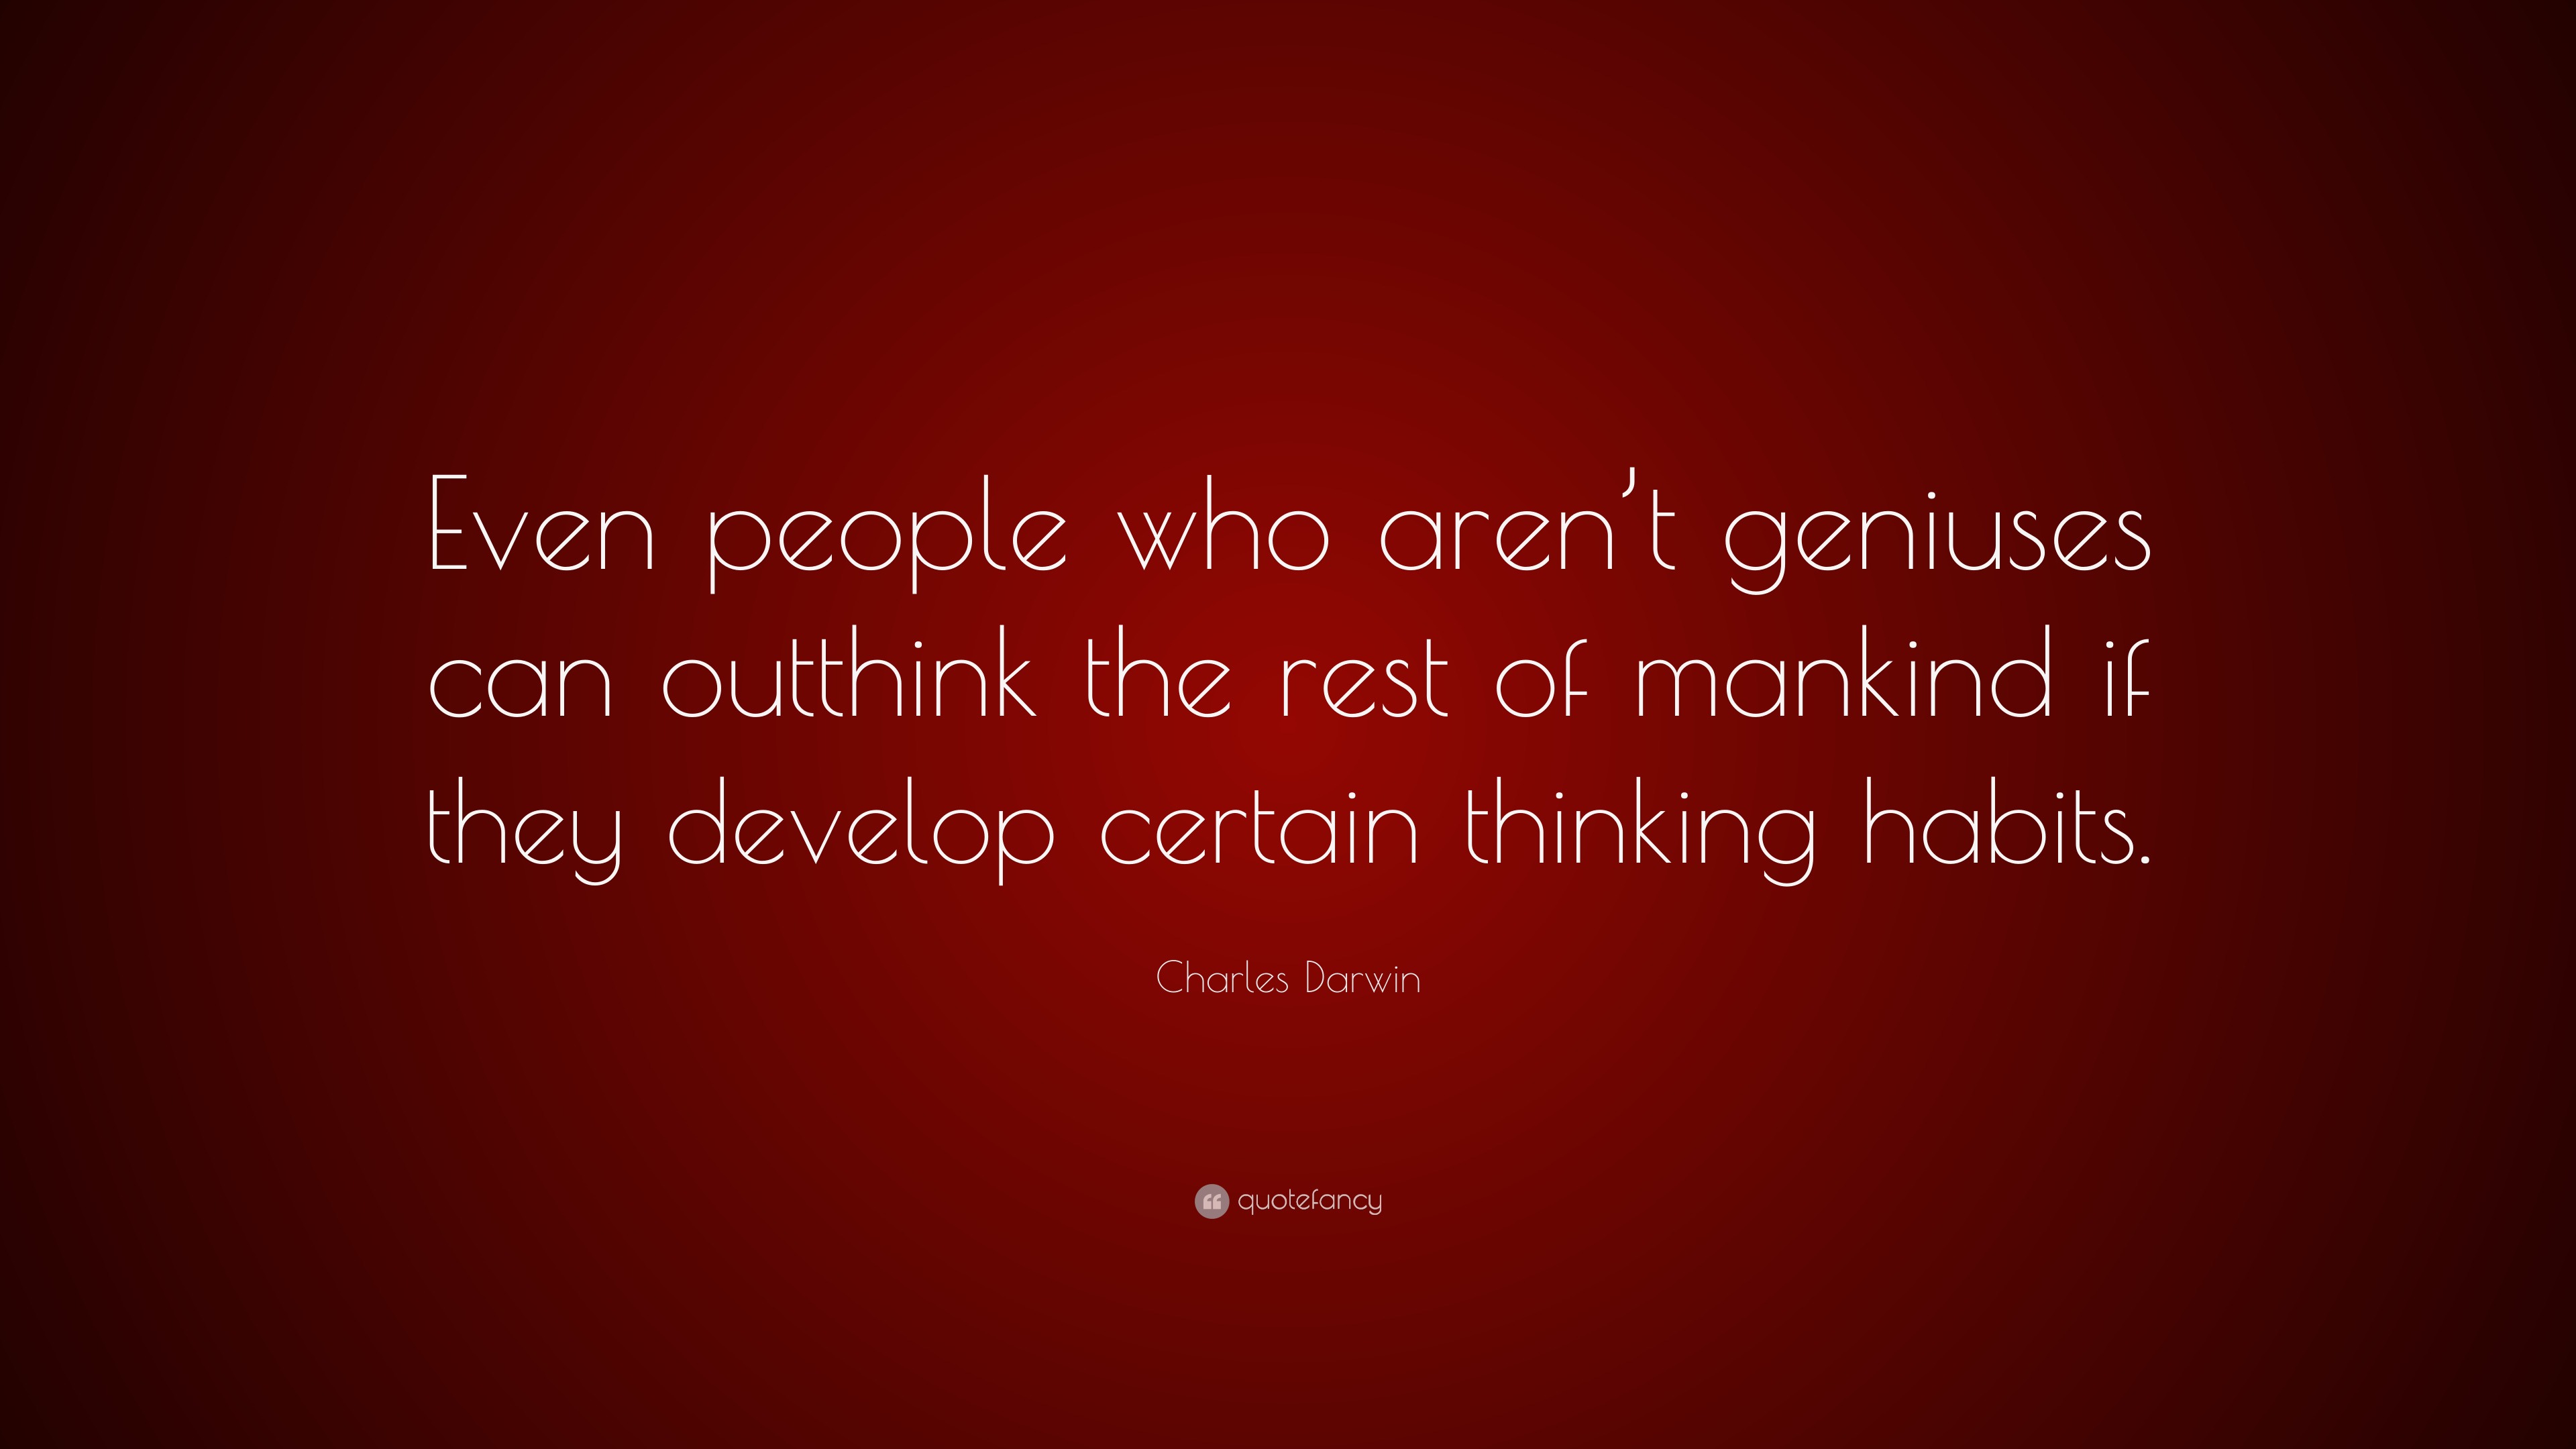 Charles Darwin Quote: “Even people who aren’t geniuses can outthink the ...